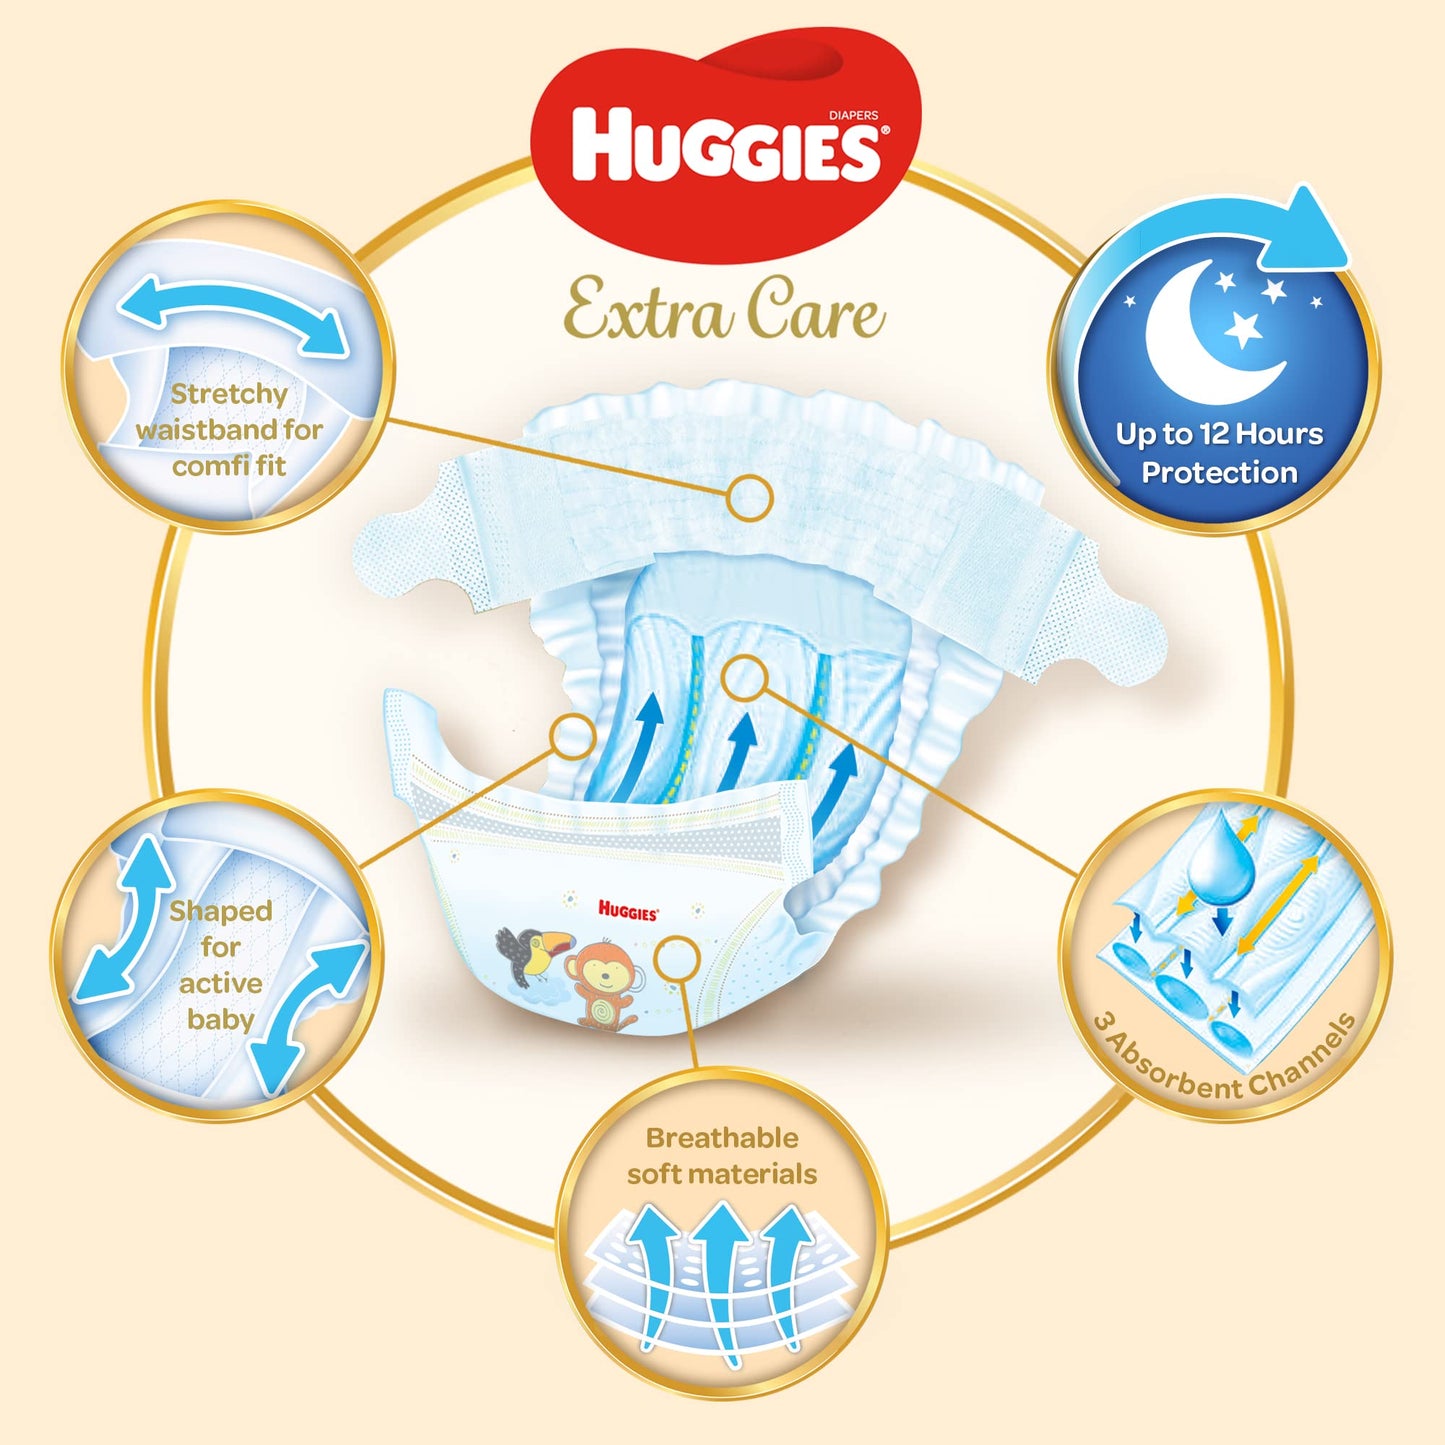 Huggies,Extra Care Baby Diapers,Diapers Size 3(4-9kg),Mega Pack of 152 Diapers,Absorbent Channels and Strechy Waistband,12h Day & Night Protection,Free from Nasties